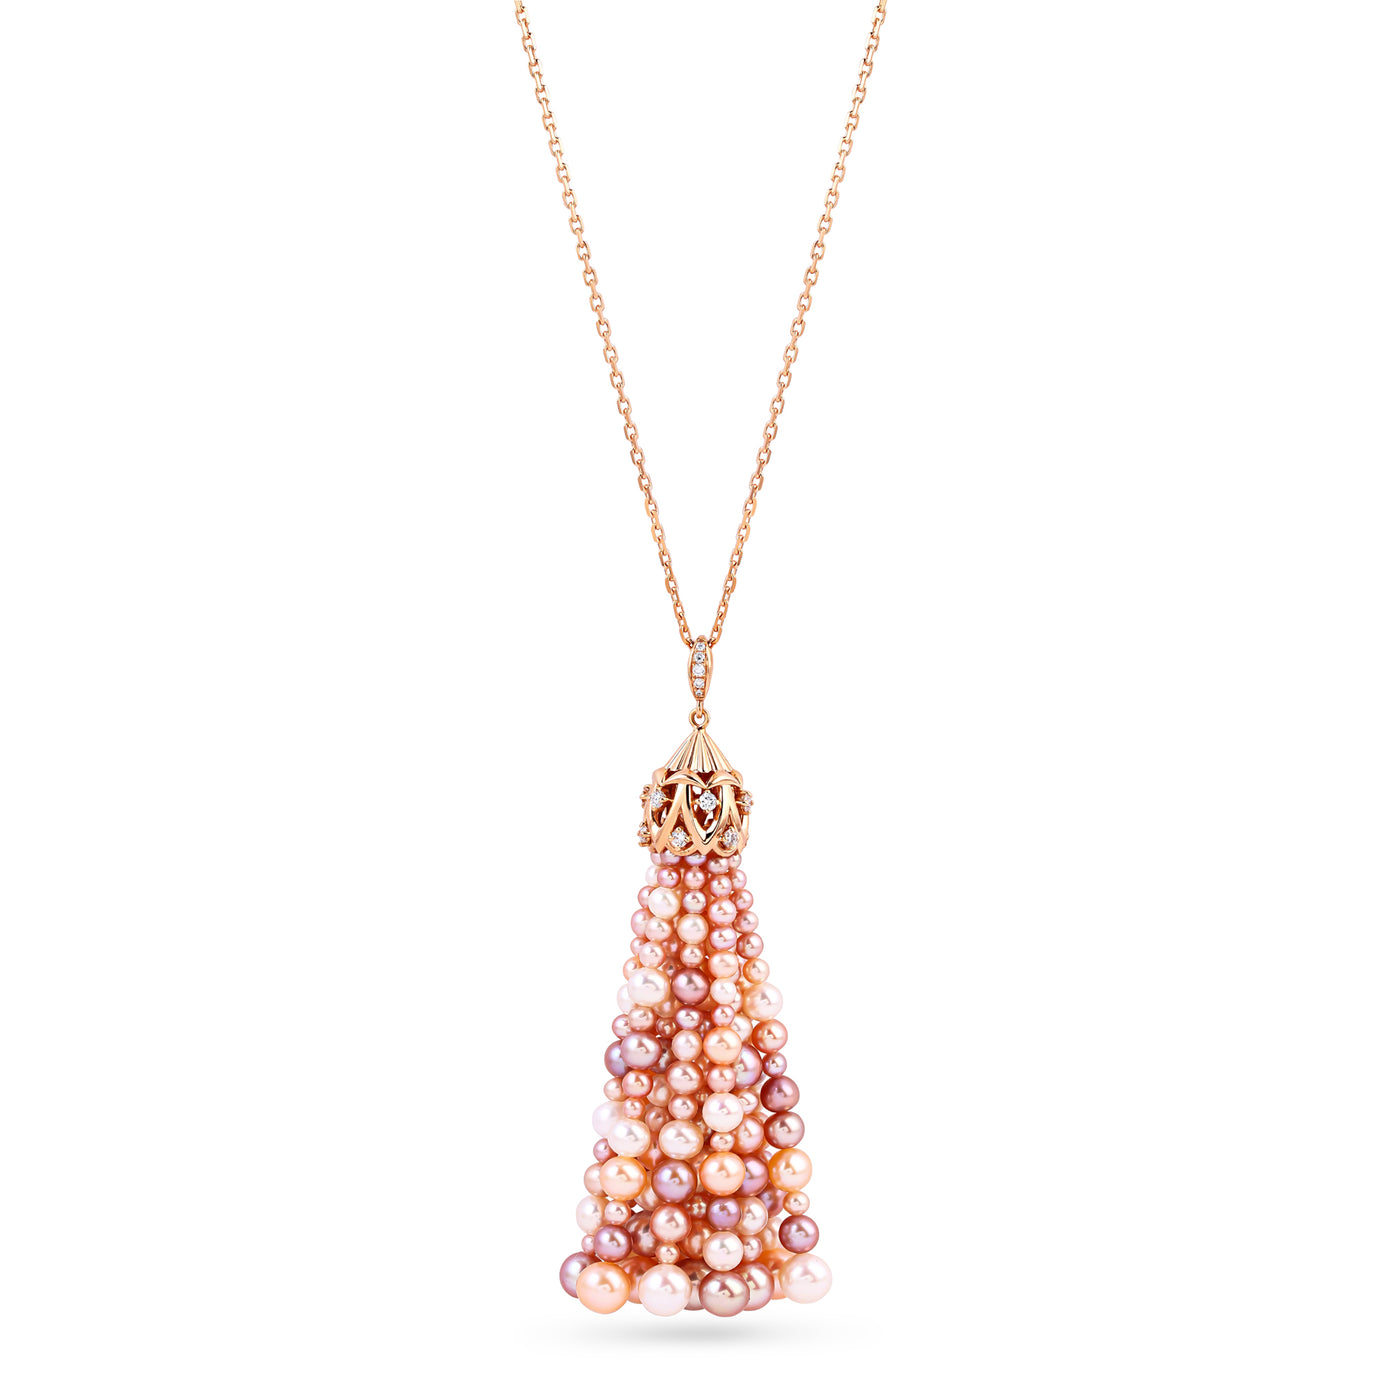 Soit Belle Rose Gold Diamond Pendant with Multi-Color Pearls